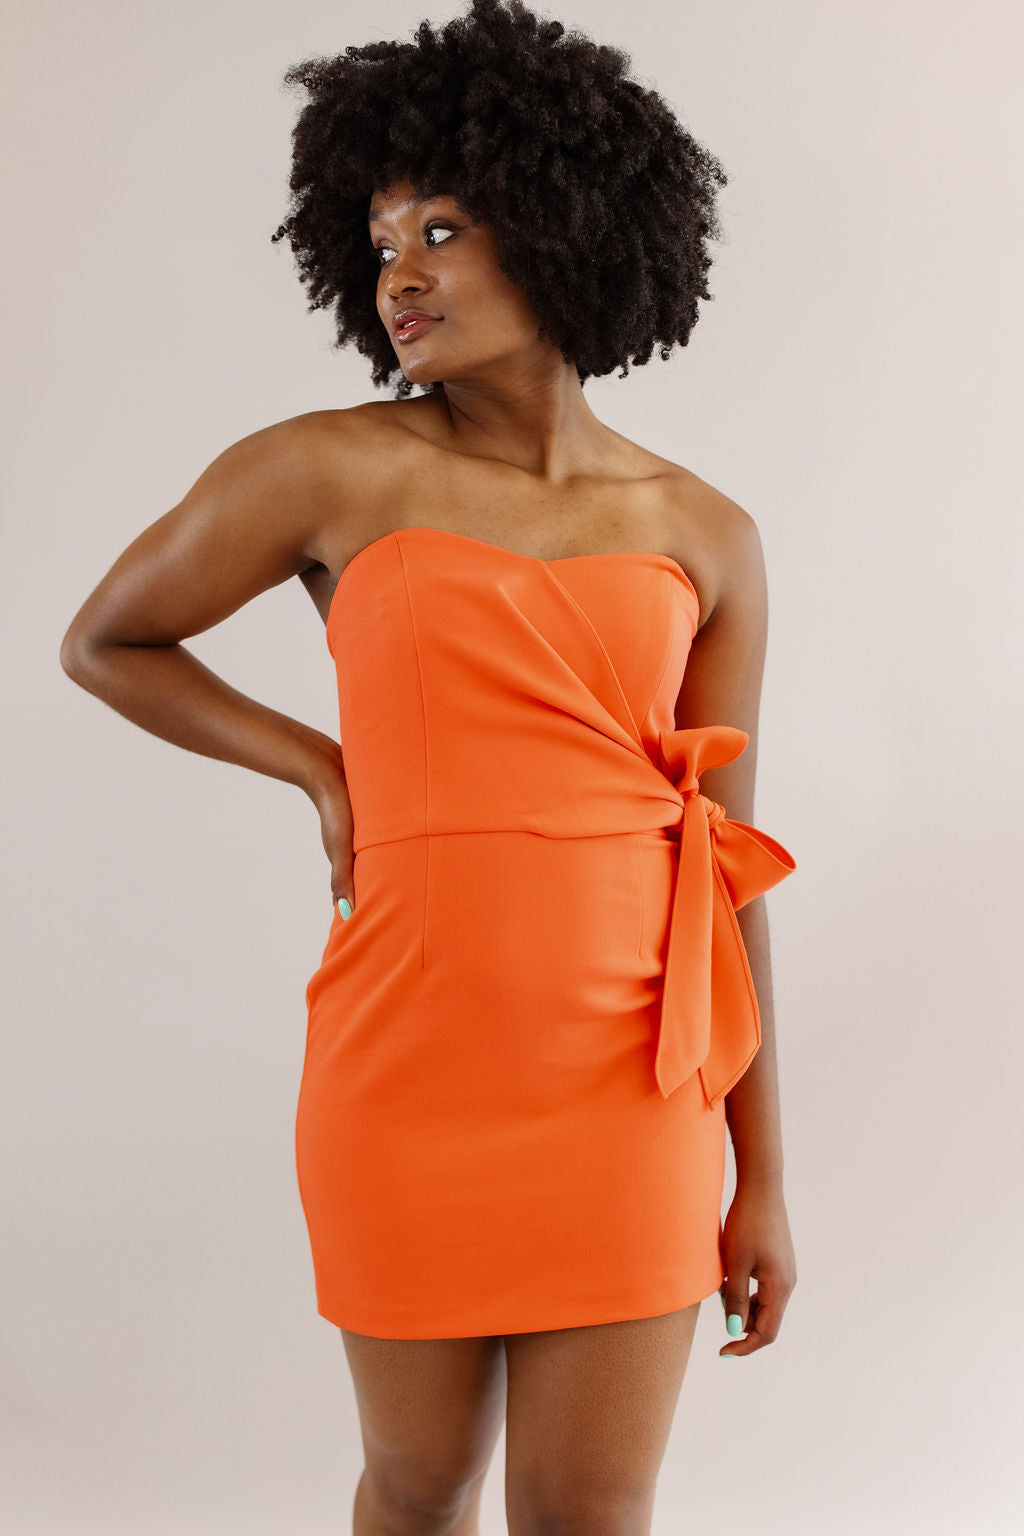 French Connection | Whisper Strapless Bow Dress | Neon Orange - Poppy and Stella